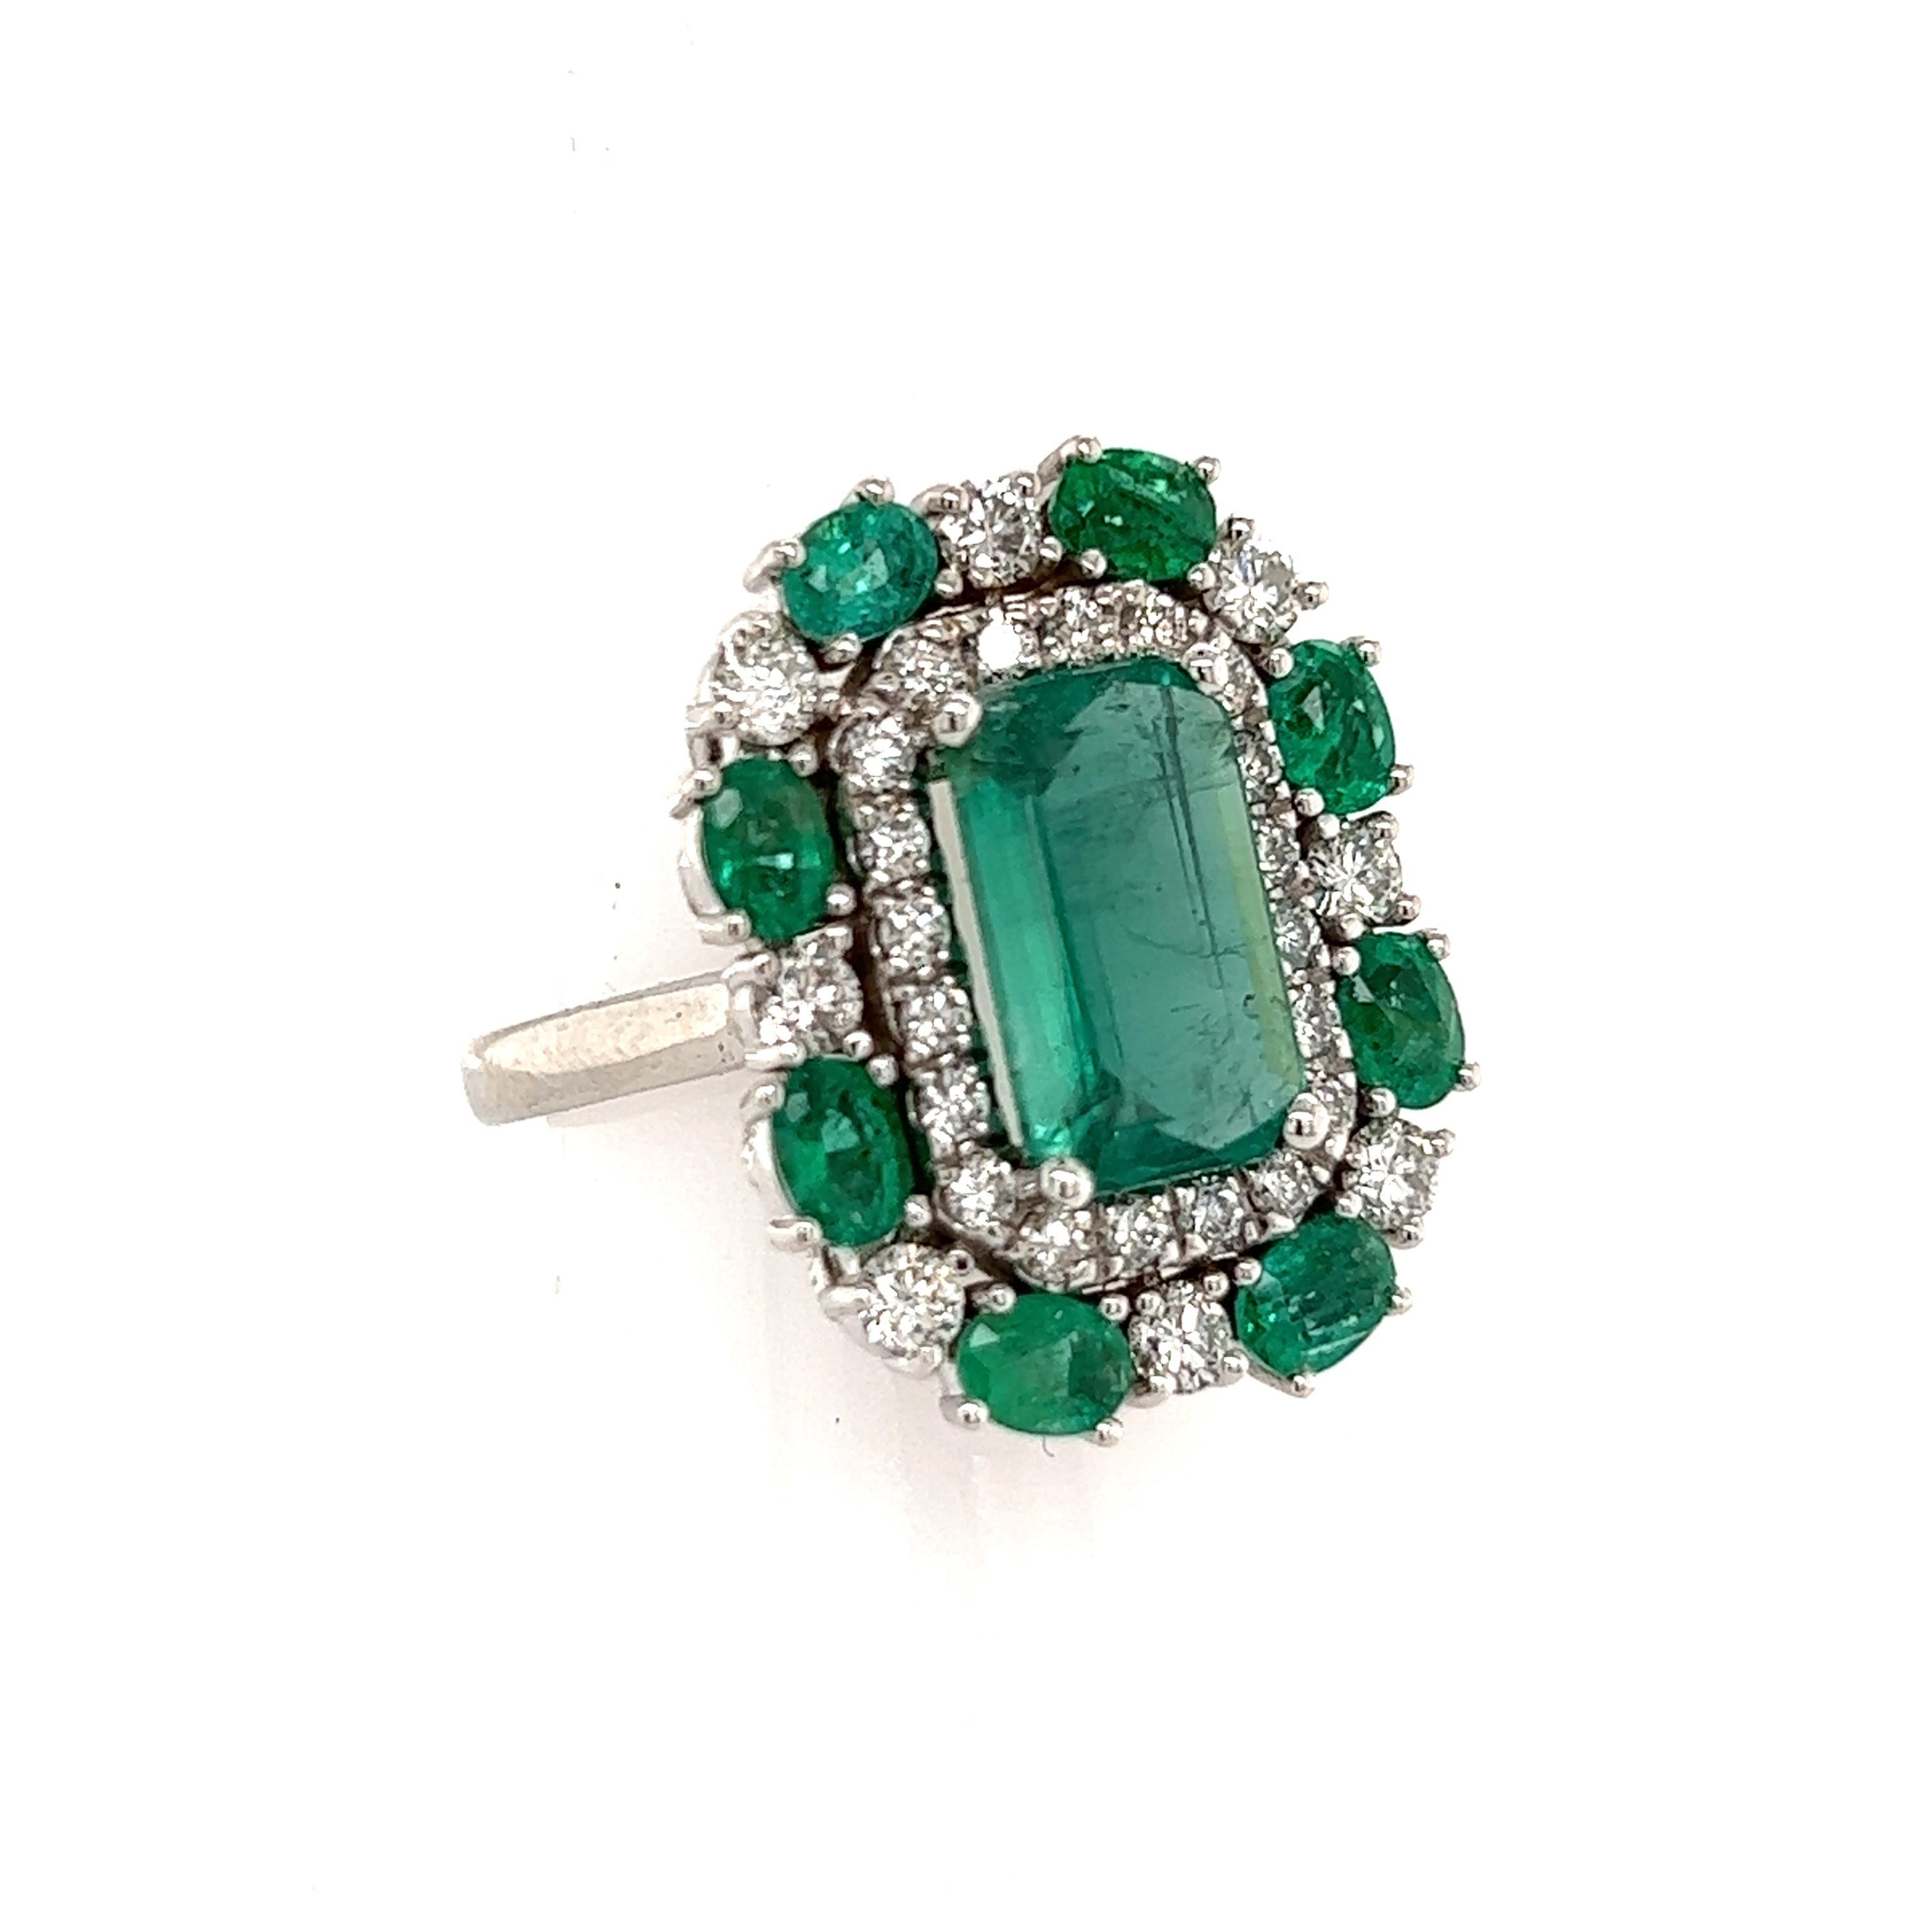 Natural Emerald Diamond Ring 6.5 14k Gold 4.52 TCW GIA Certified For Sale 3